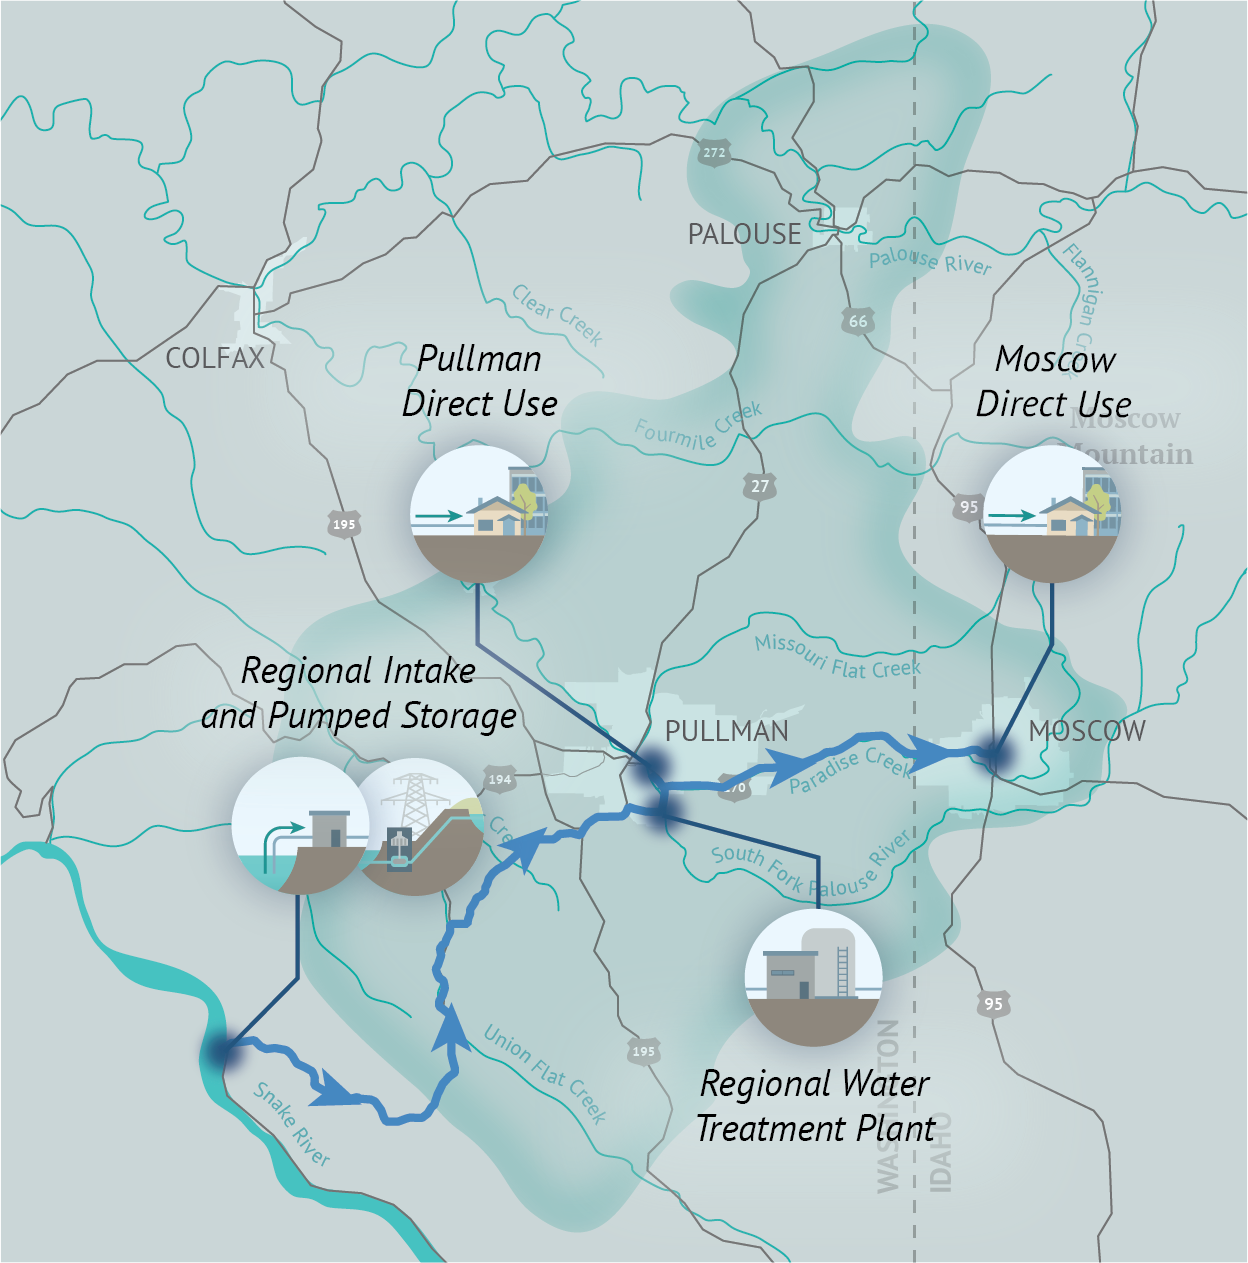 Map of Palouse Groundwater Basin Boundary with project elements in Moscow and Pullman areas. Gray background with black and teal lines representing roadways and waterways, with a dark teal border representing the basin boundary. Project elements include images of water piped from waterway into a building, then into a water treatment plant, then into a house; a pumped storage energy option.